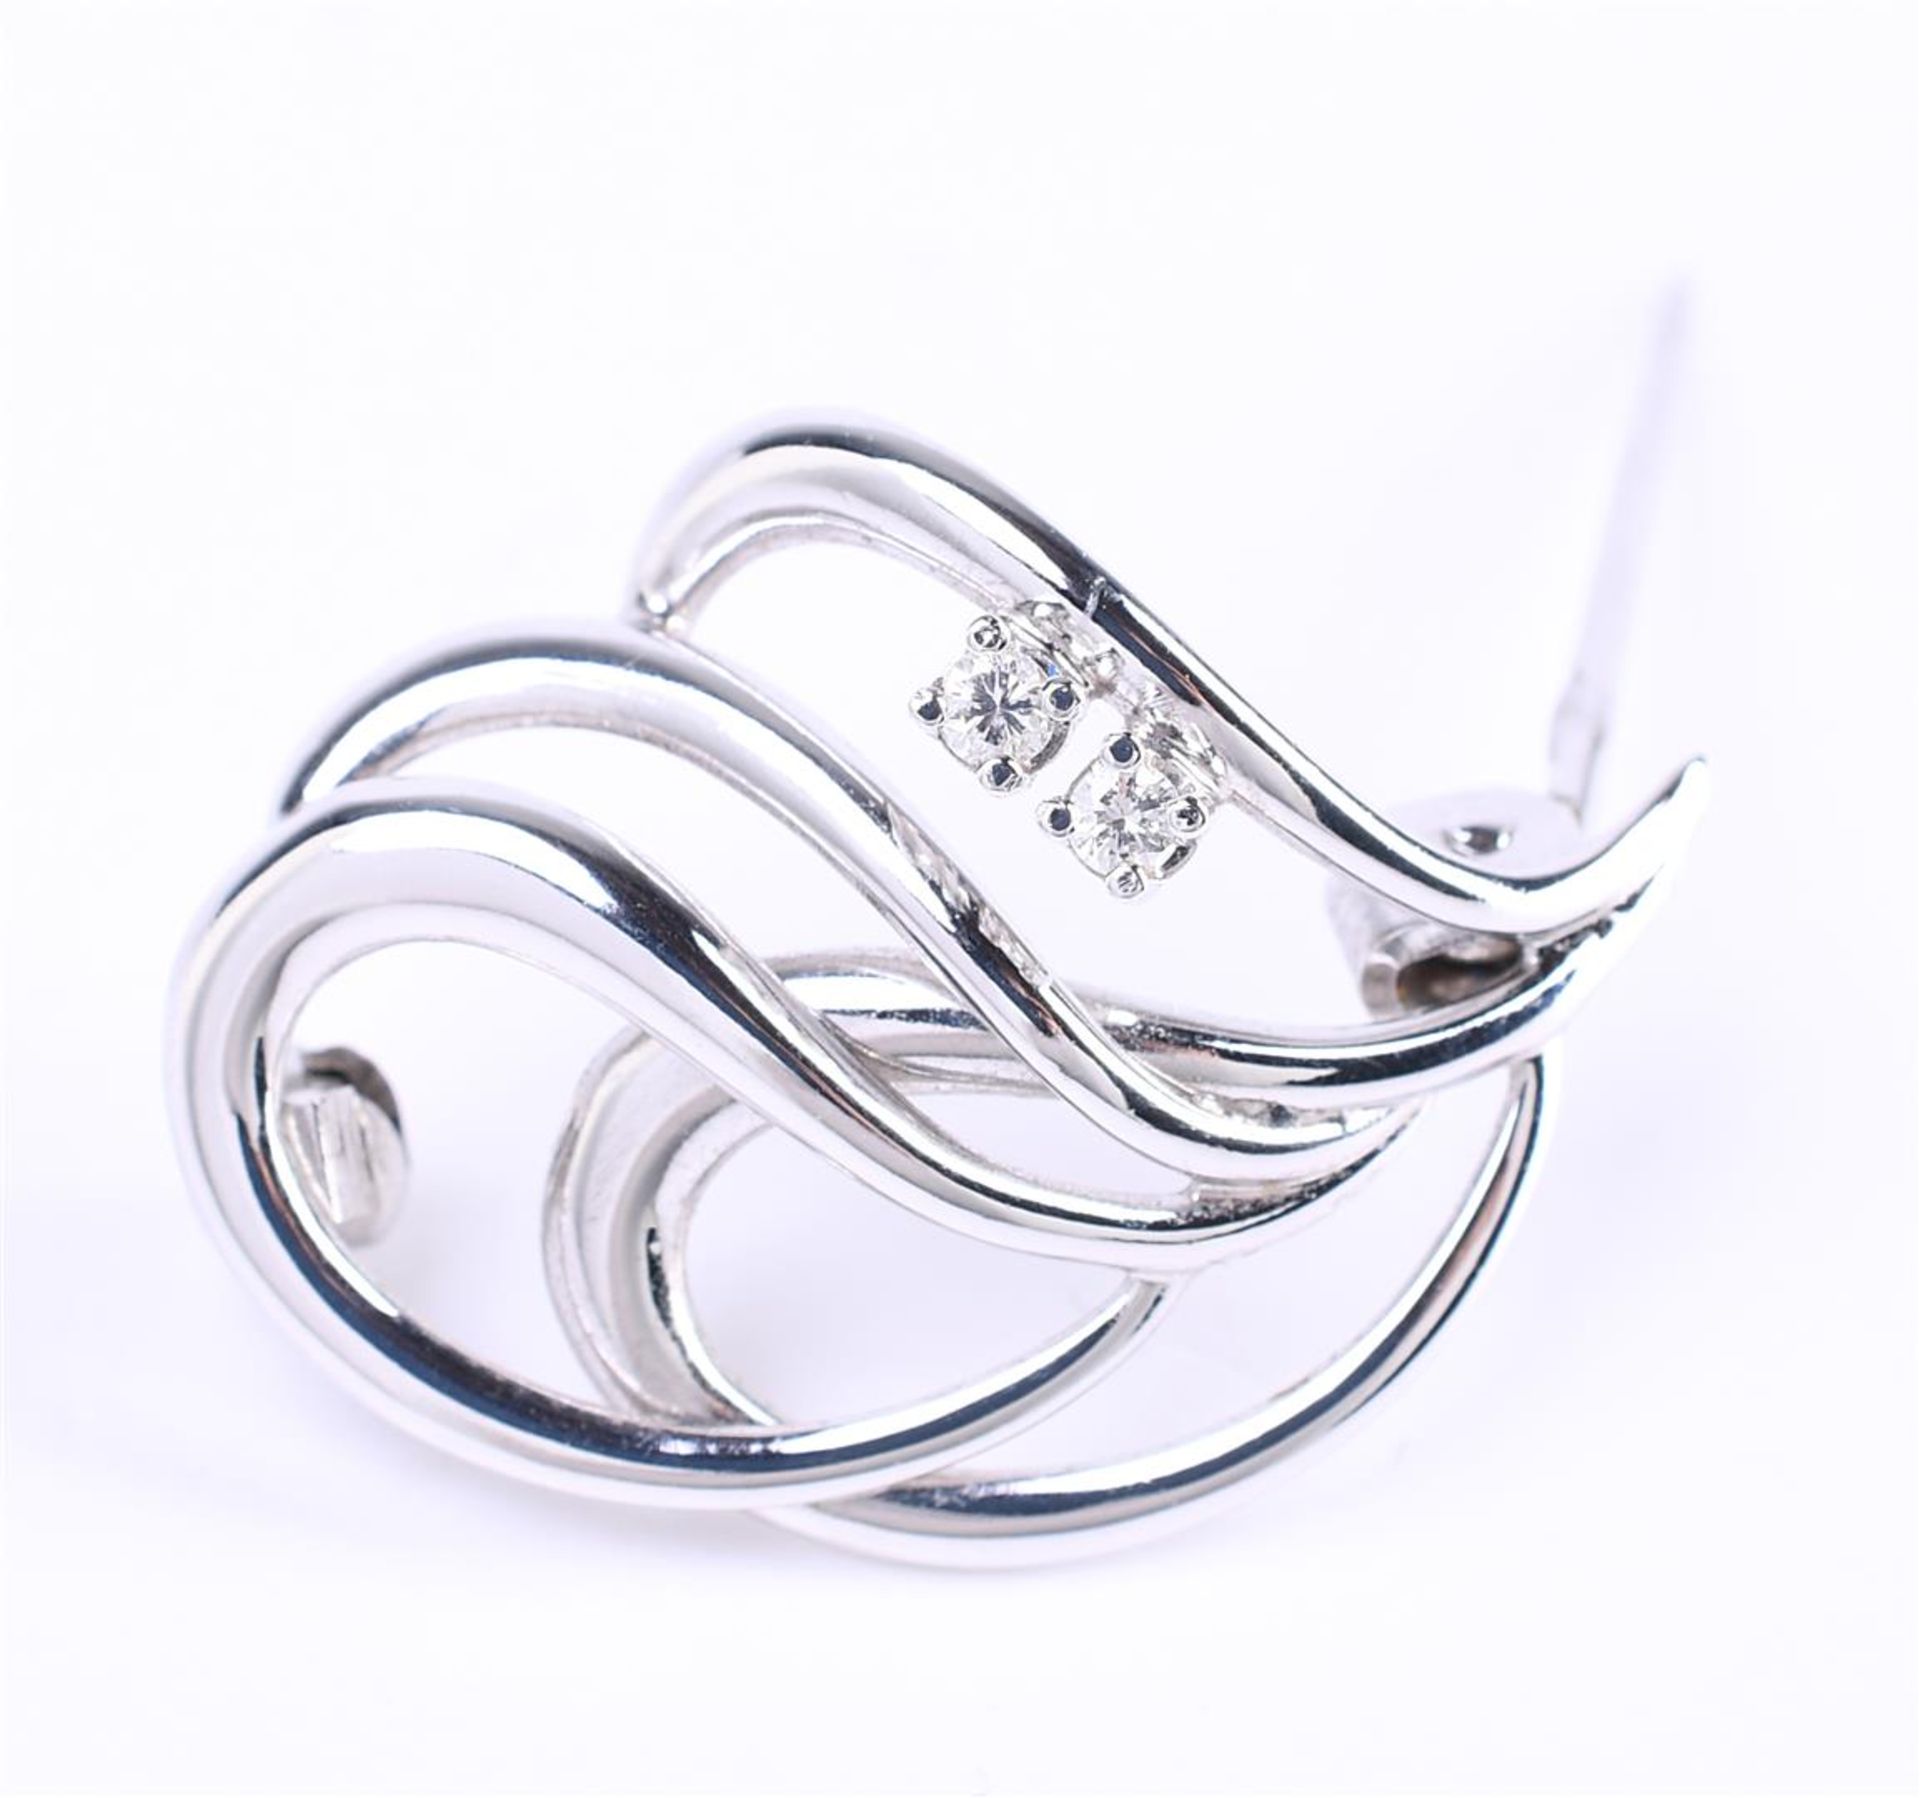 14 carat white gold ladies brooch set with 2 brilliant cut diamonds of approx. 0.02 ct